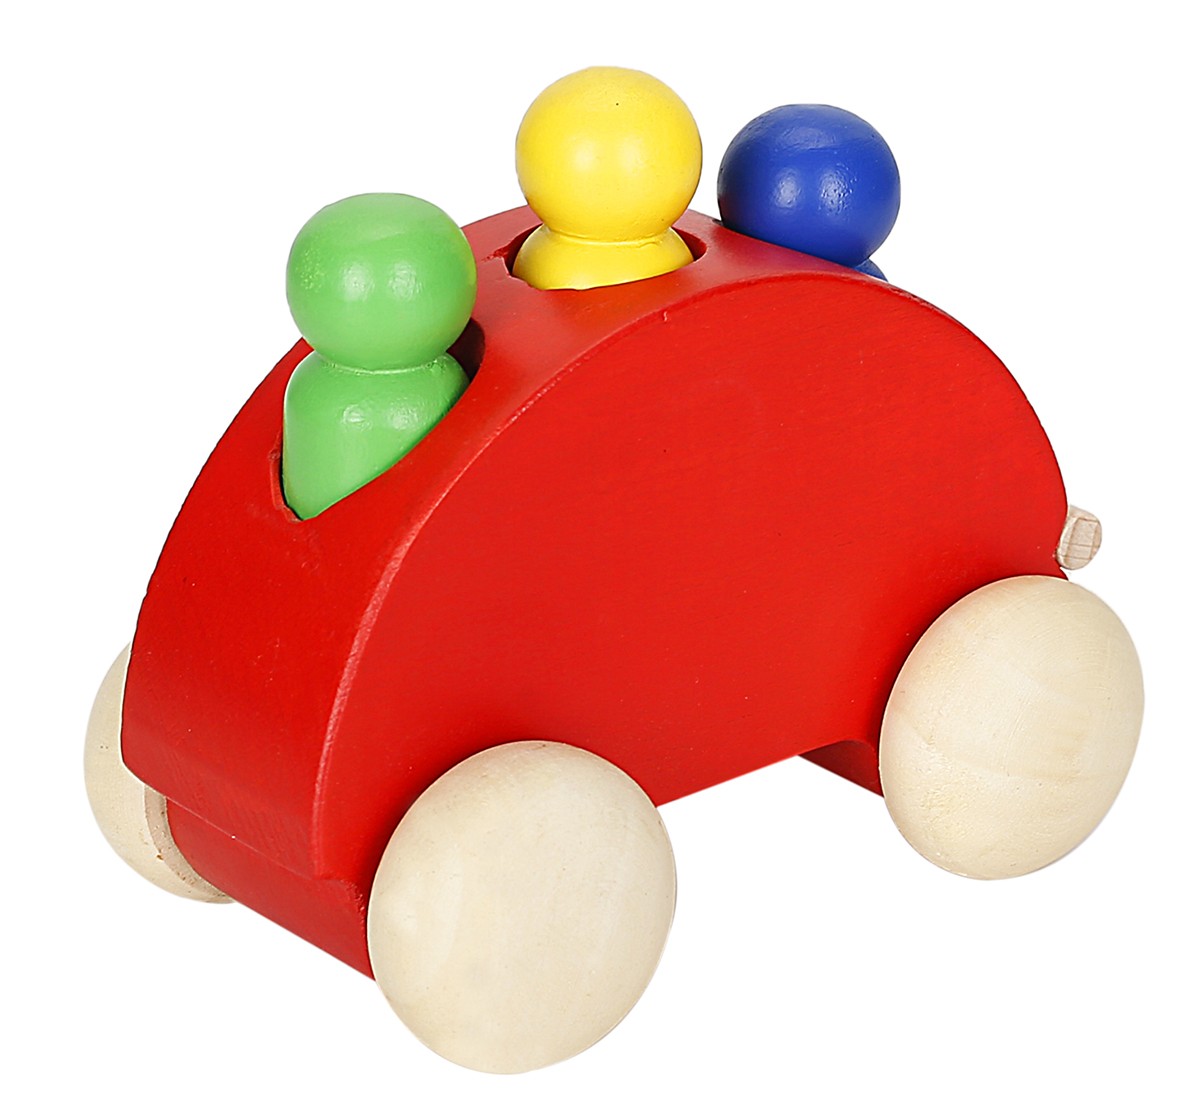 Shooting Star Counting Car Pull Along Toy for kids 3Y+, Multicolour